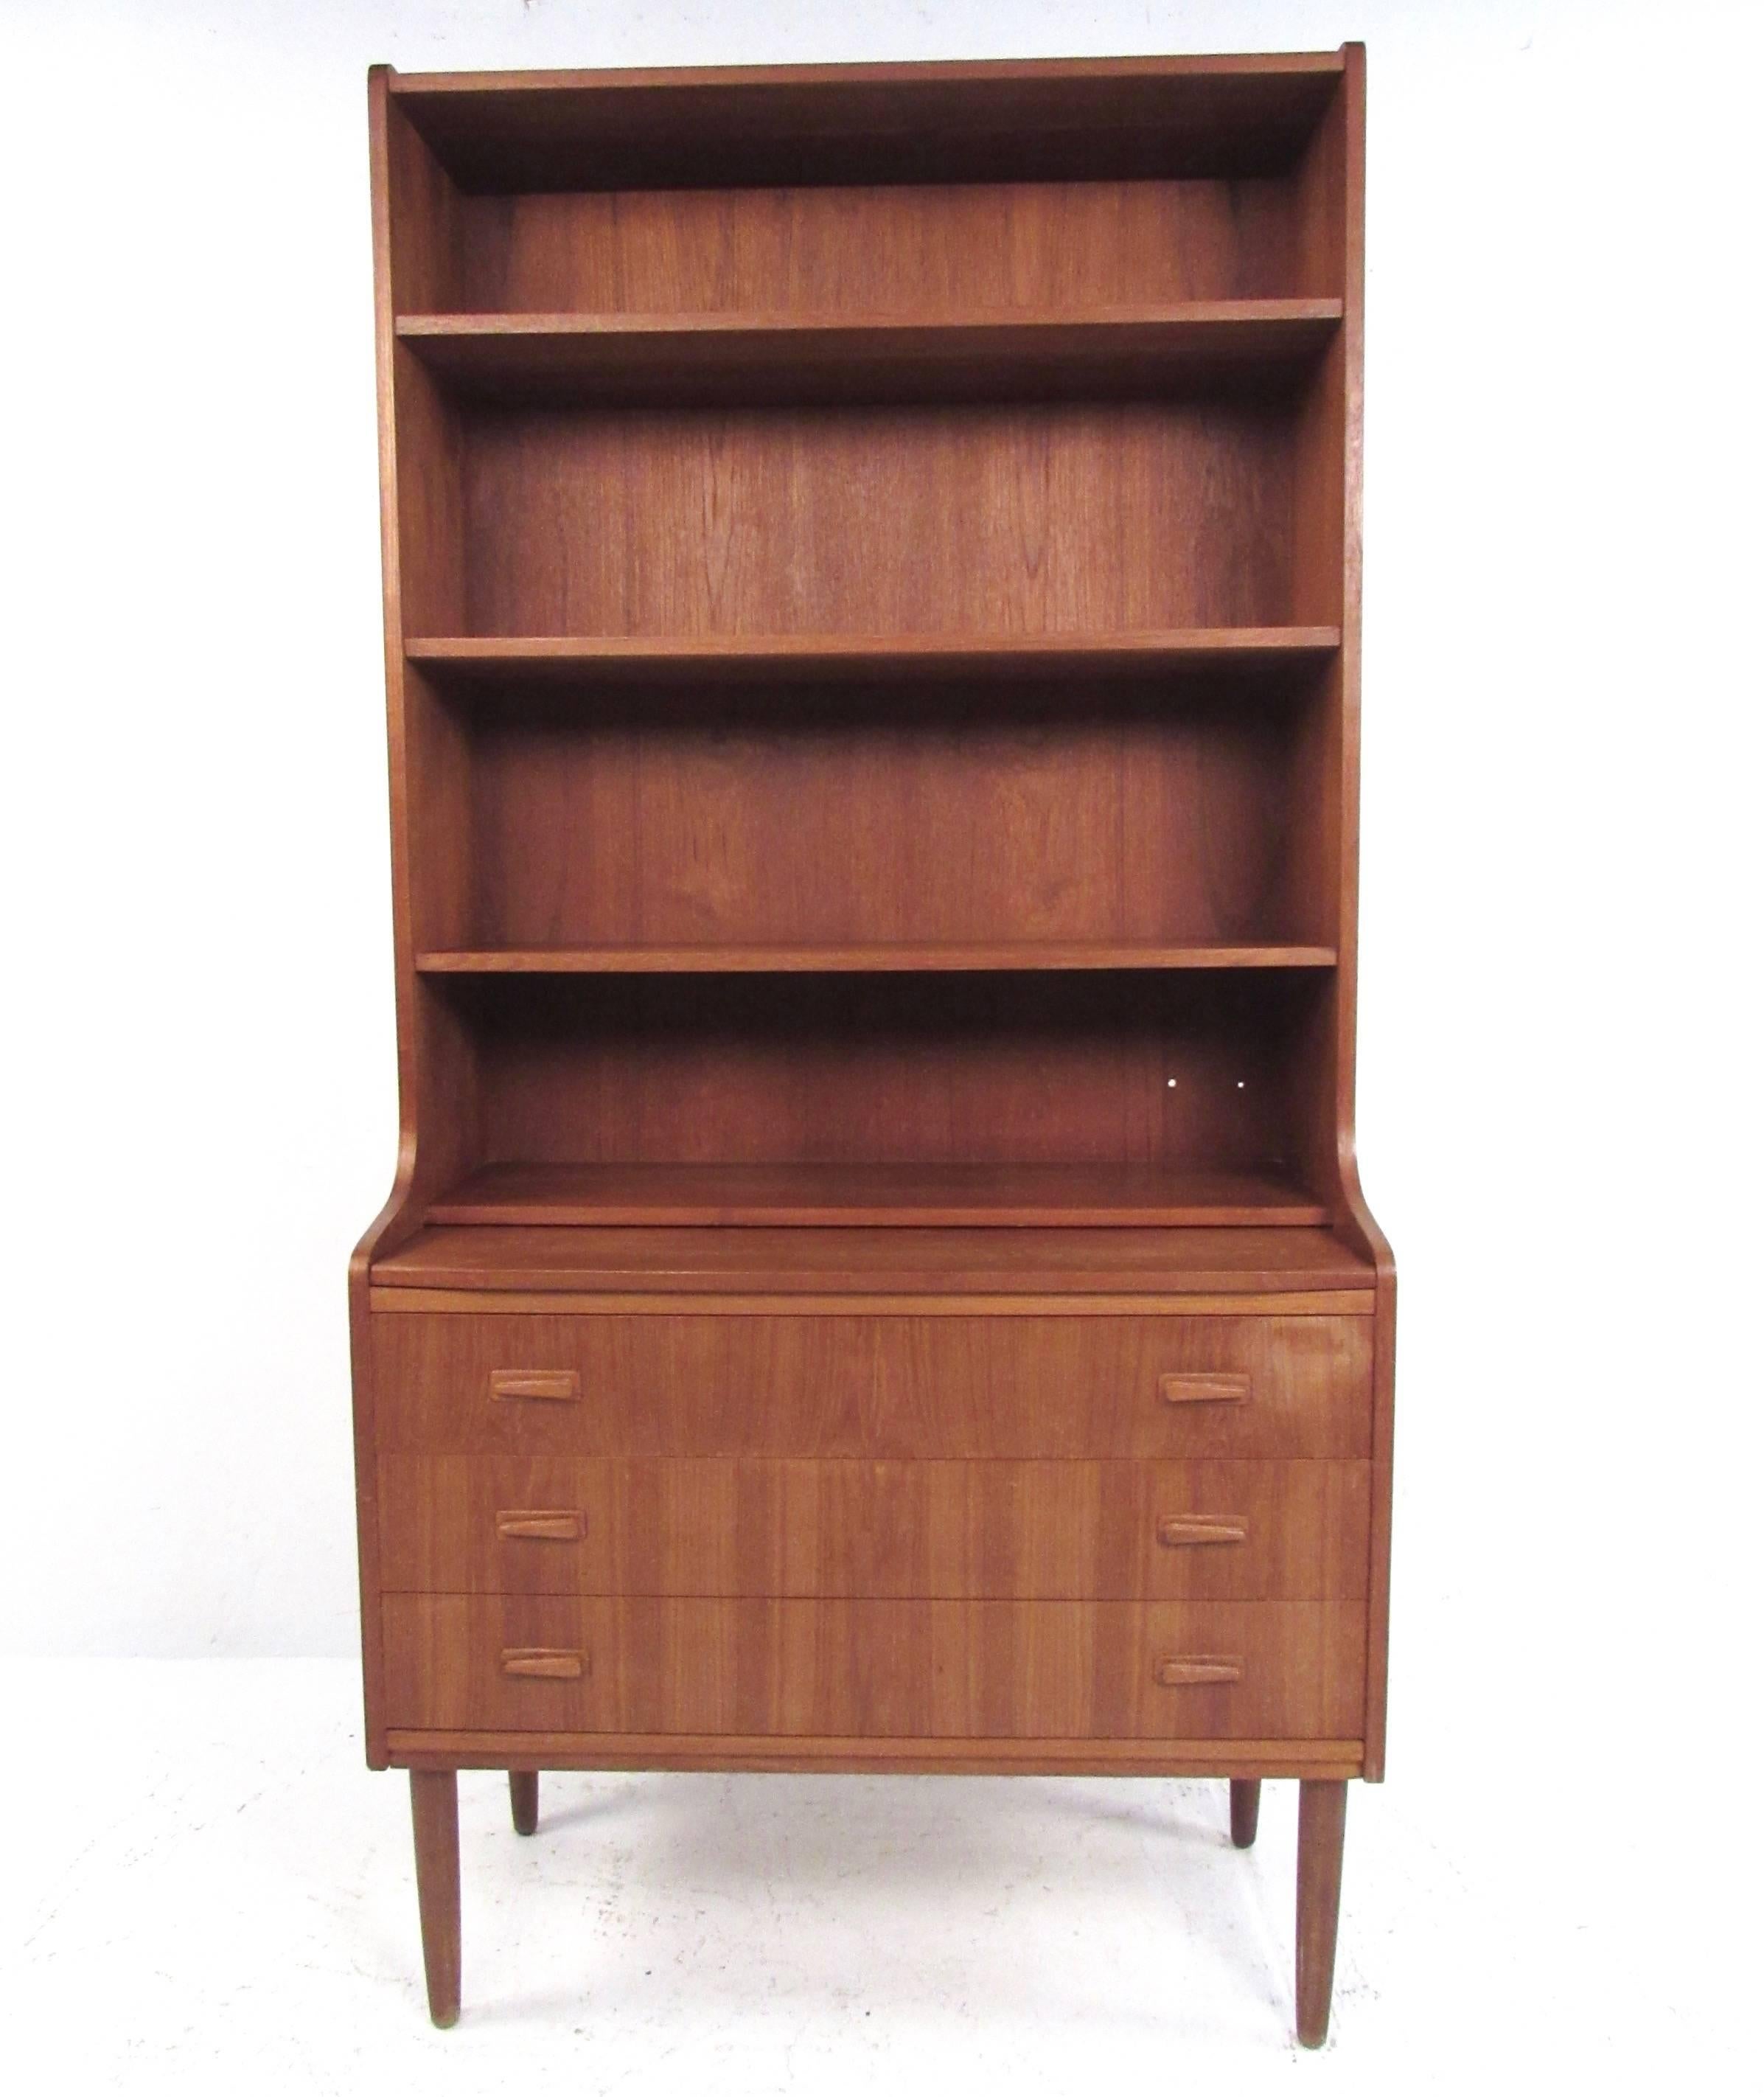 This stunning vintage modern secretary combines Mid-Century Danish style with space saving versatility. Four shelves for storage and display are complimented by three spacious drawers with unique carved drawer pulls. Pull-out writing table provides